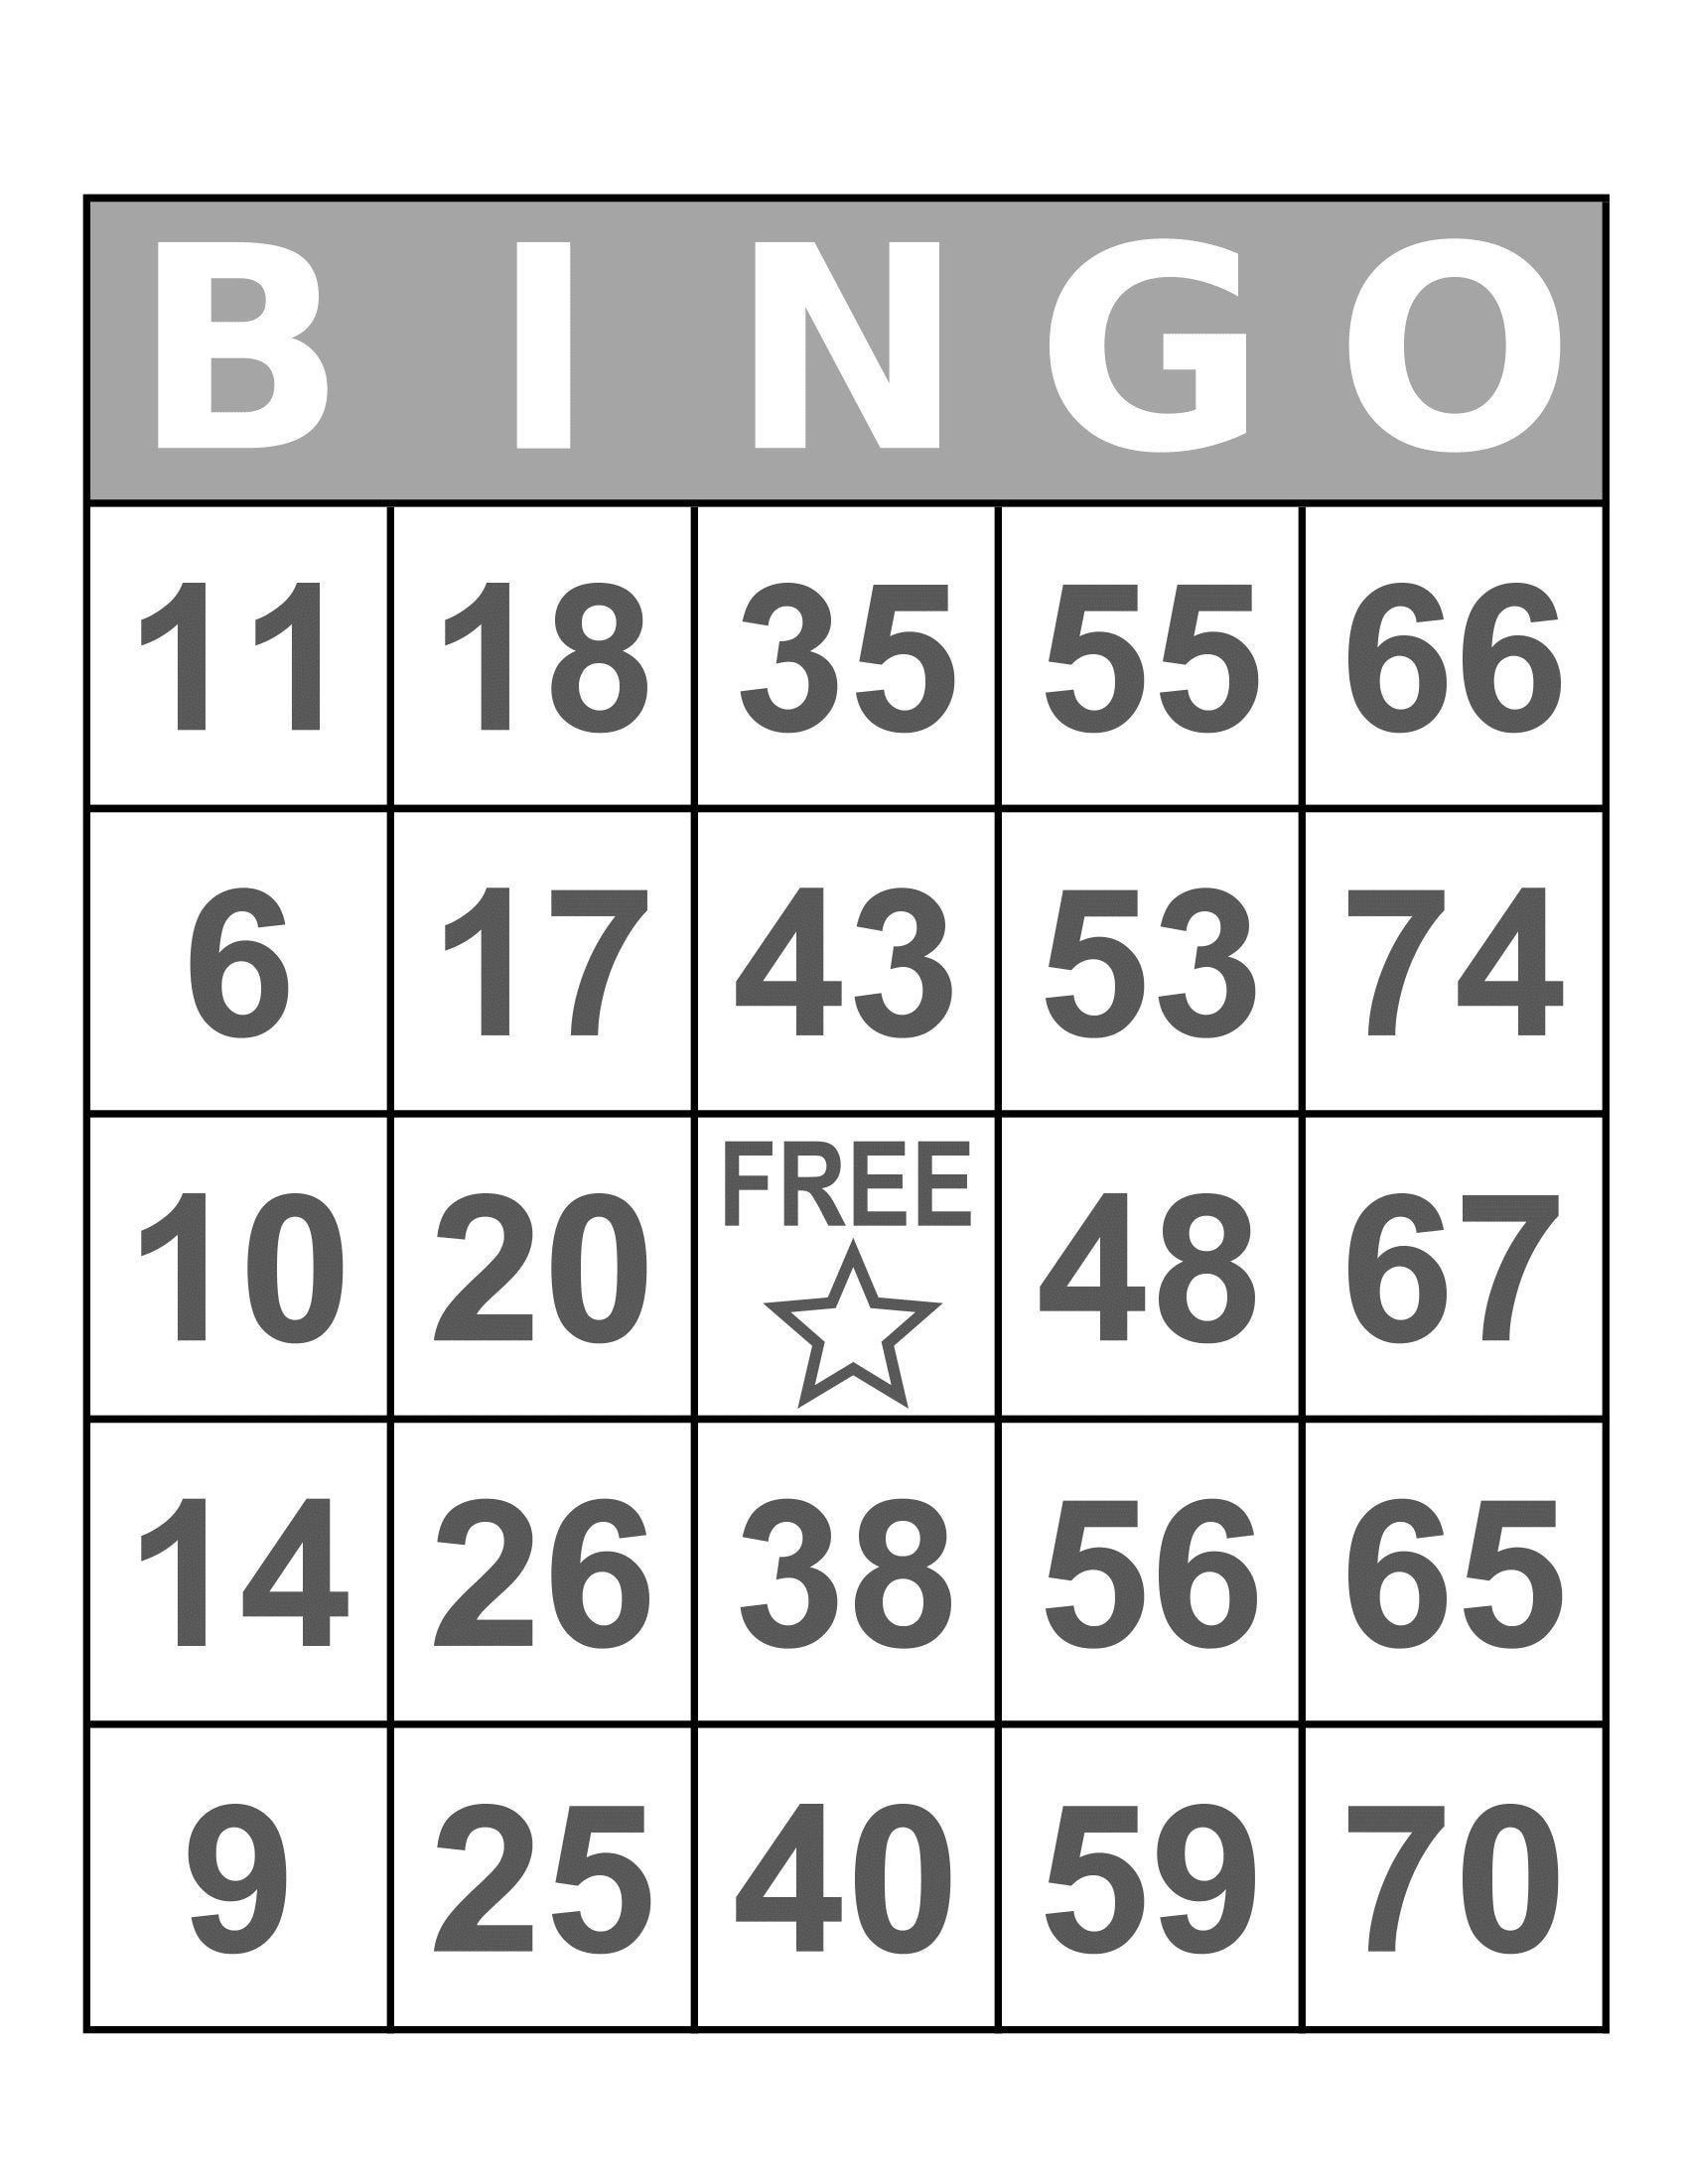 bingo-cards-1000-cards-1-per-page-large-print-immediate-etsy